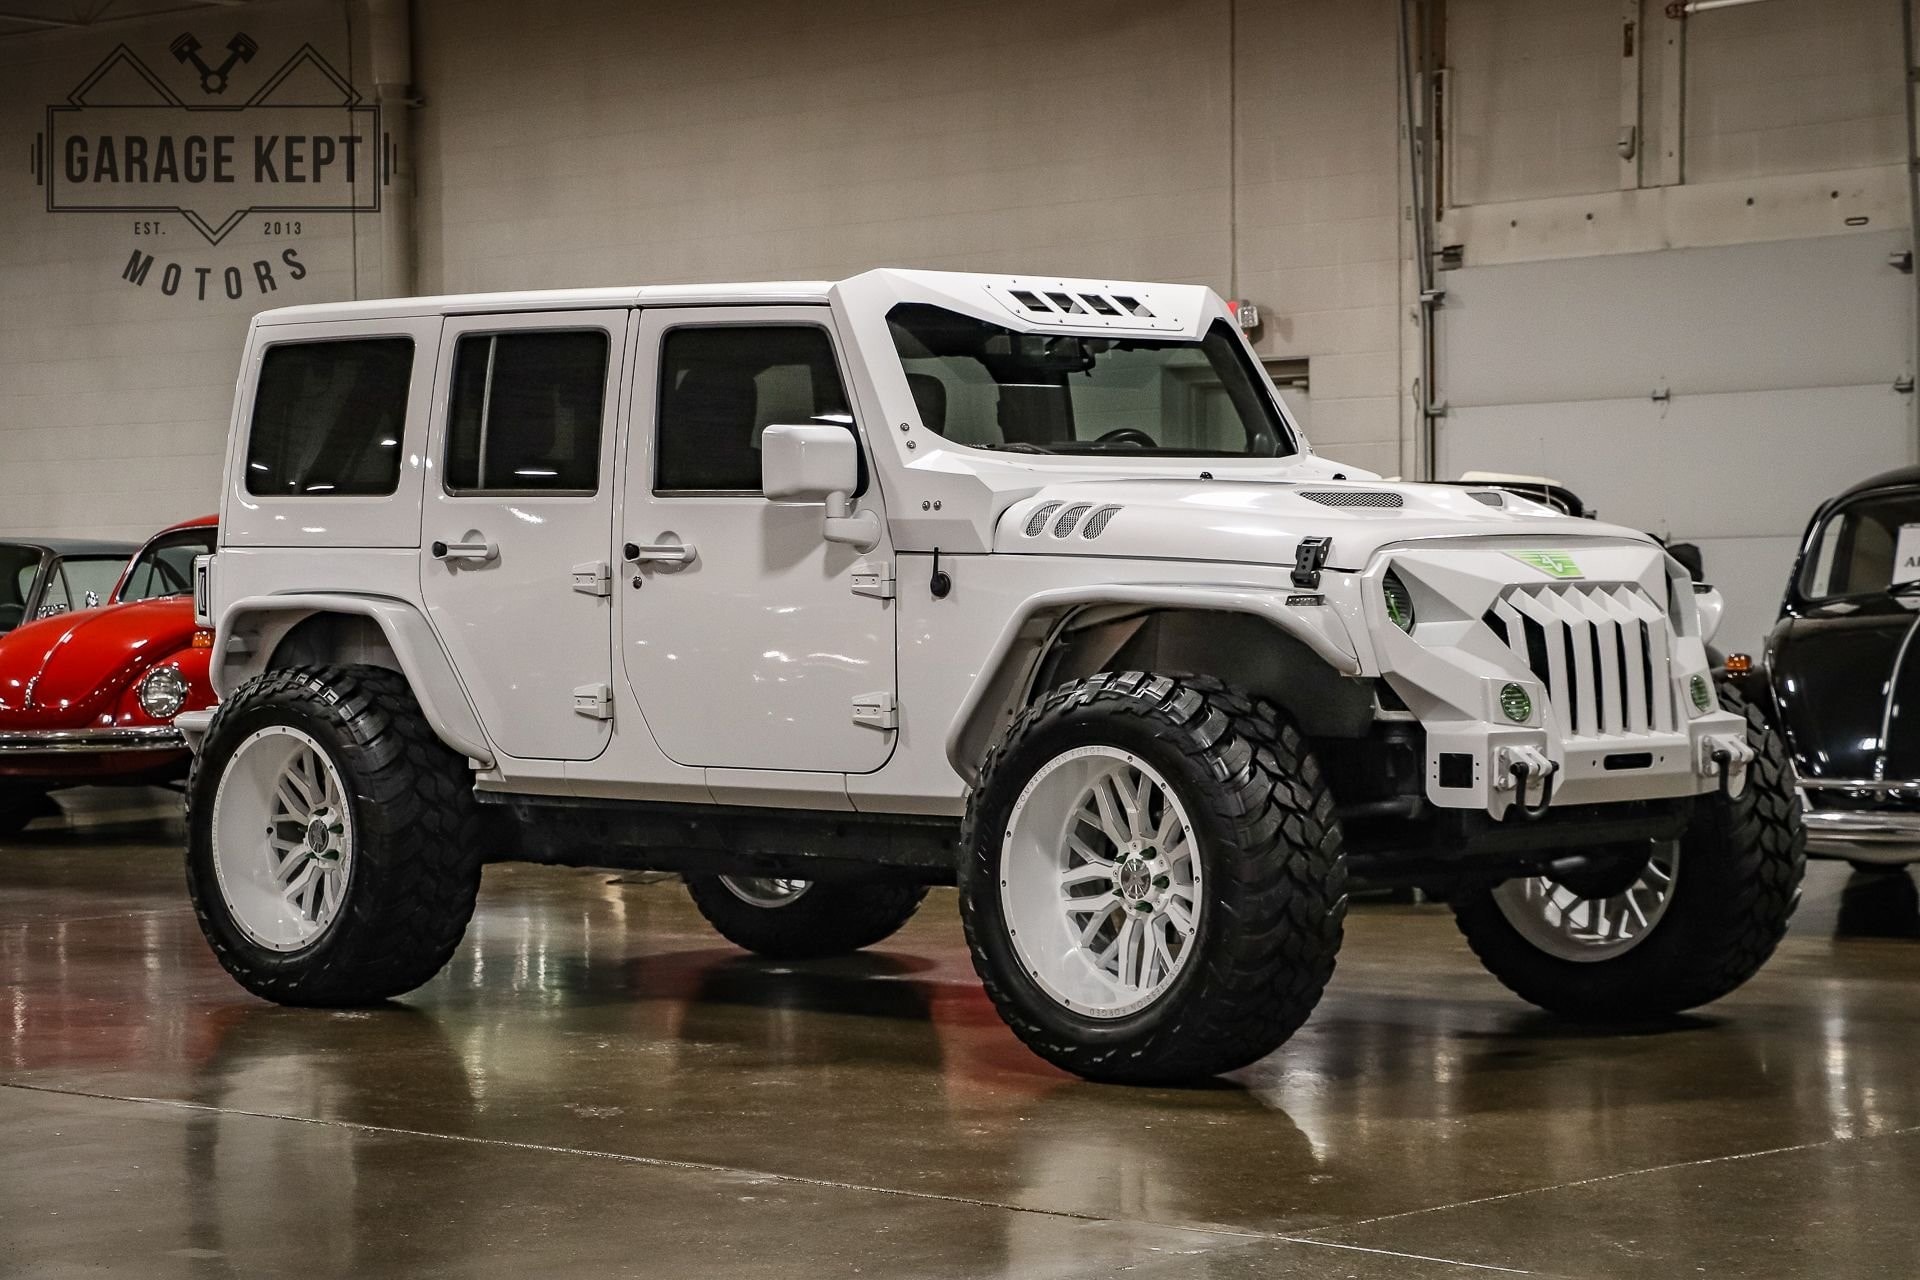 HEMI-Toting 2013 Jeep Wrangler Looks Ready for a Truly Unlimited Sahara  Outing - autoevolution